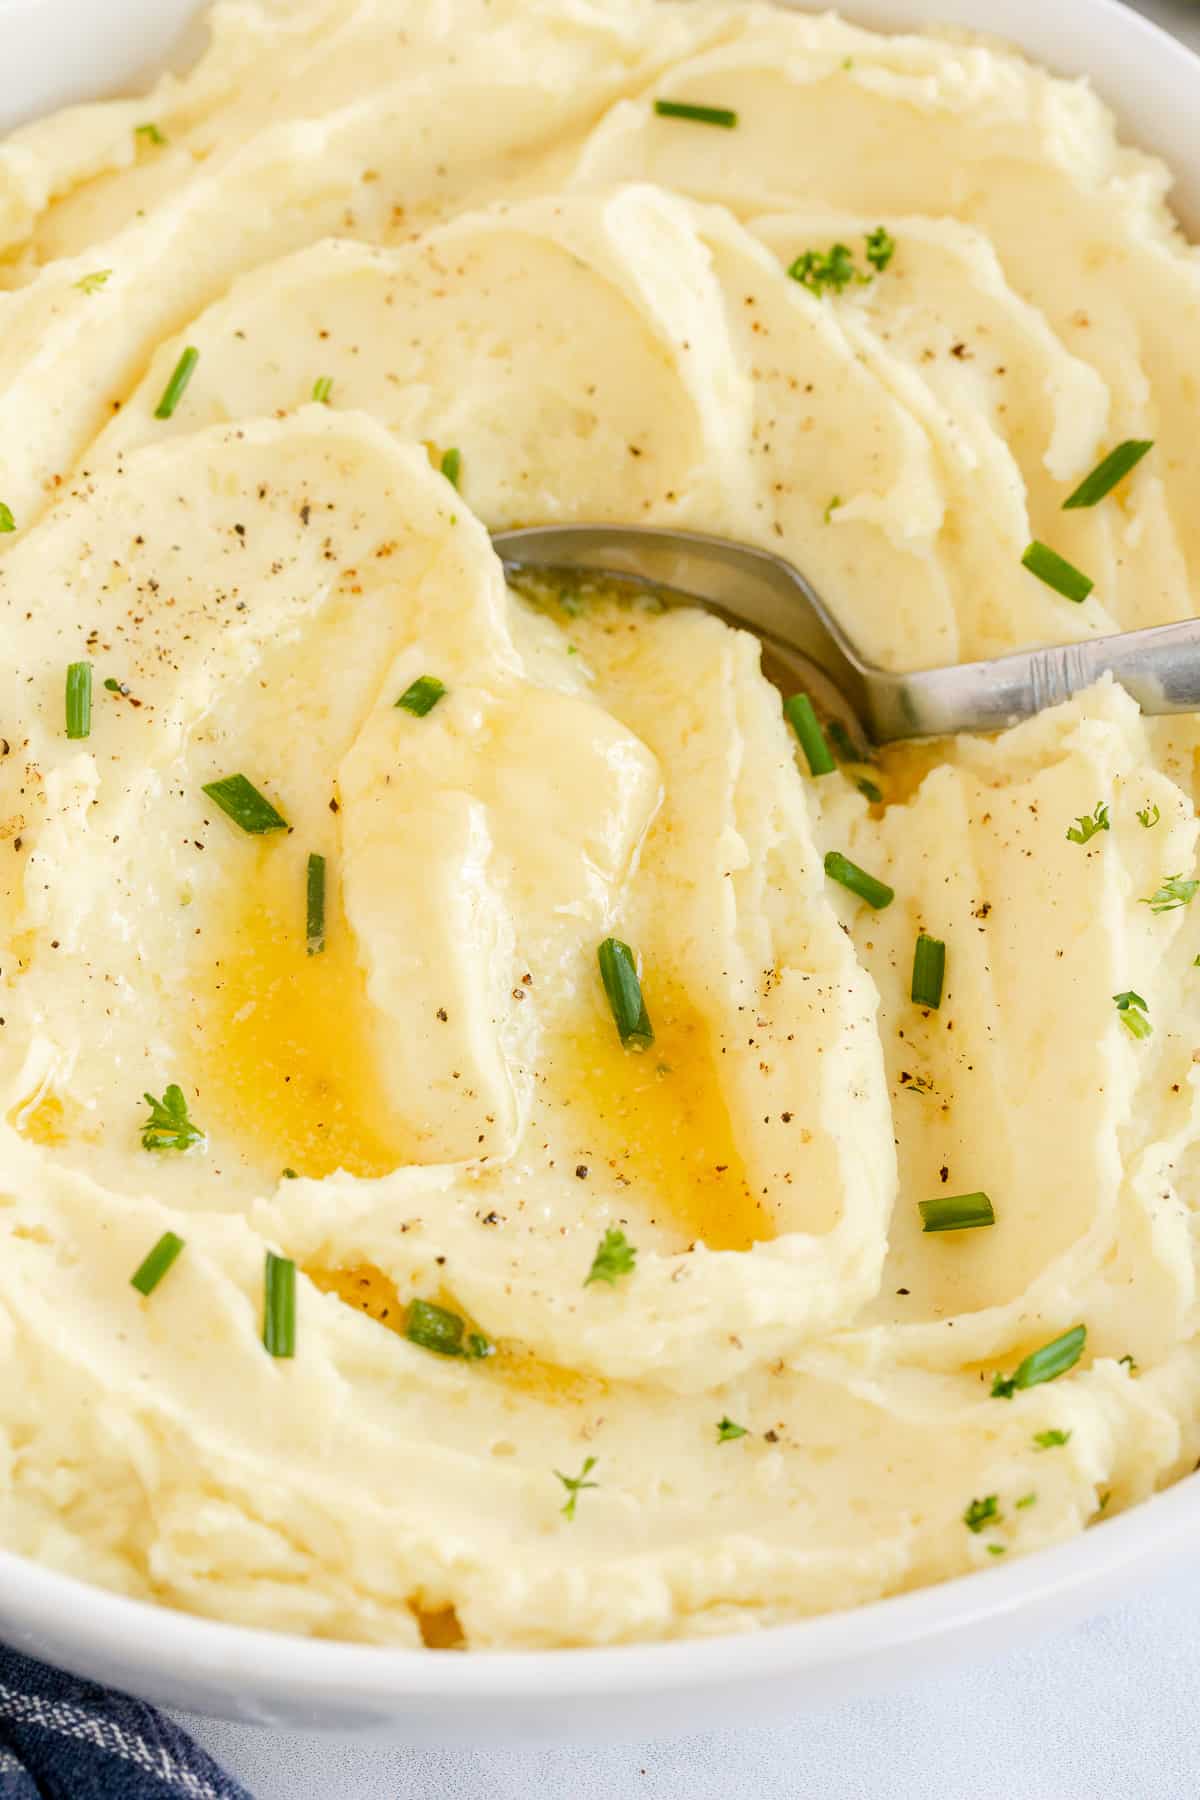 A close up of a spoon in a bowl of mashed potatoes.